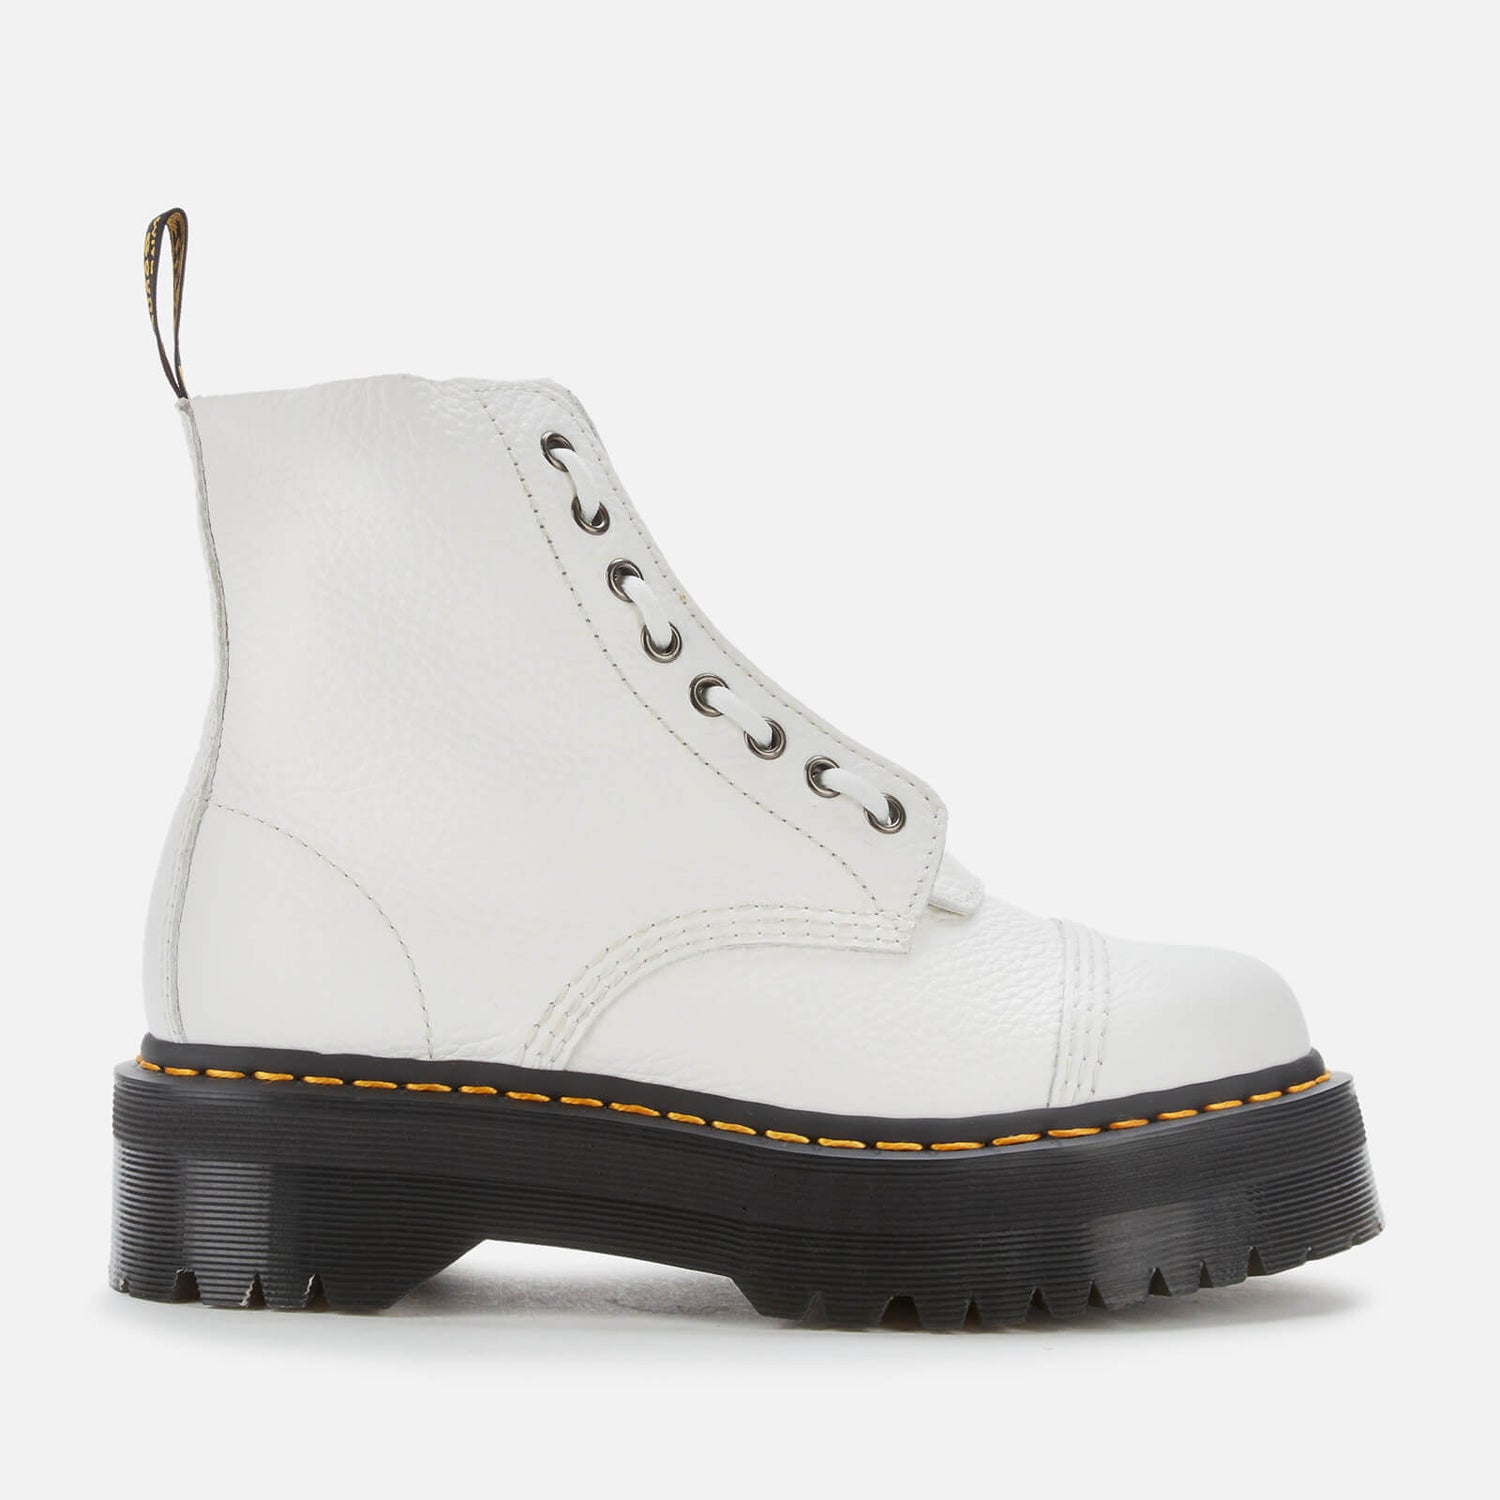 Dr. Martens Women's Sinclair Leather Zip Front Boots - White - UK 3